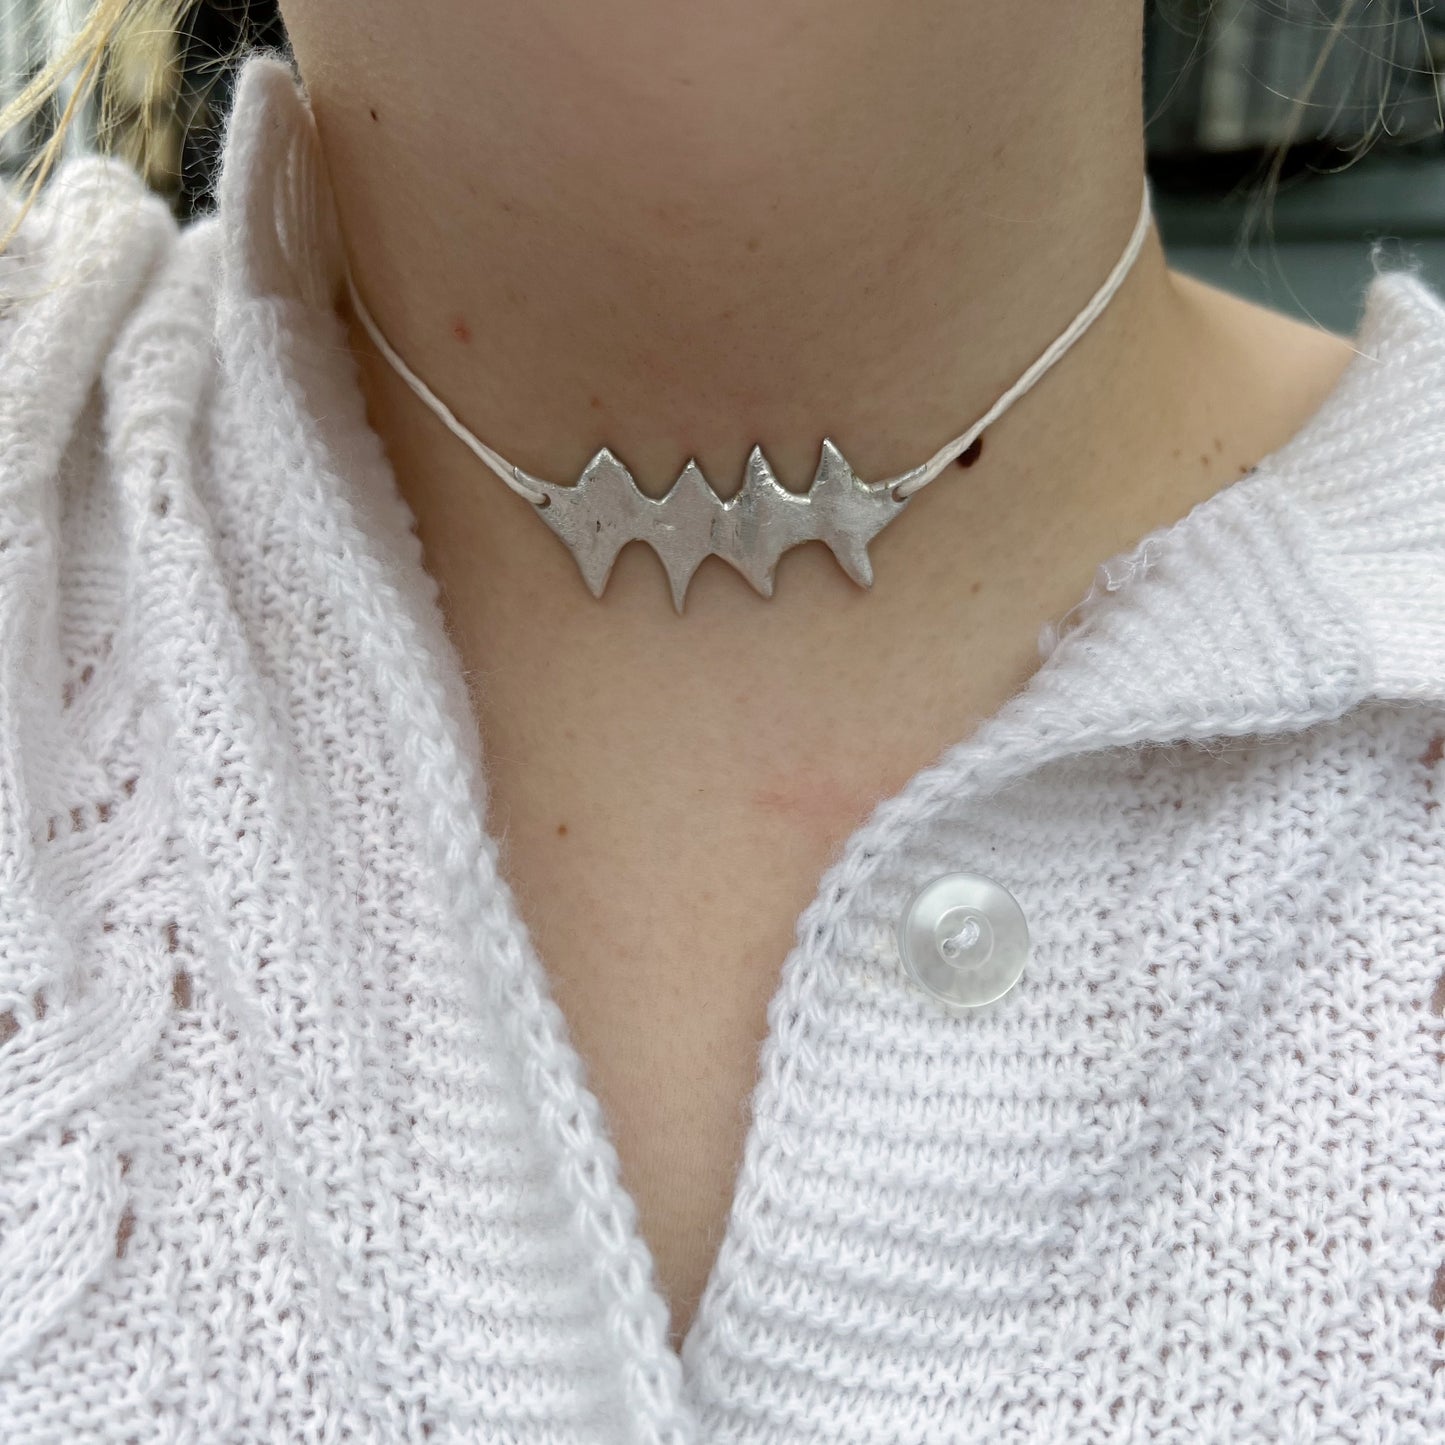 The Barbed Wire Choker